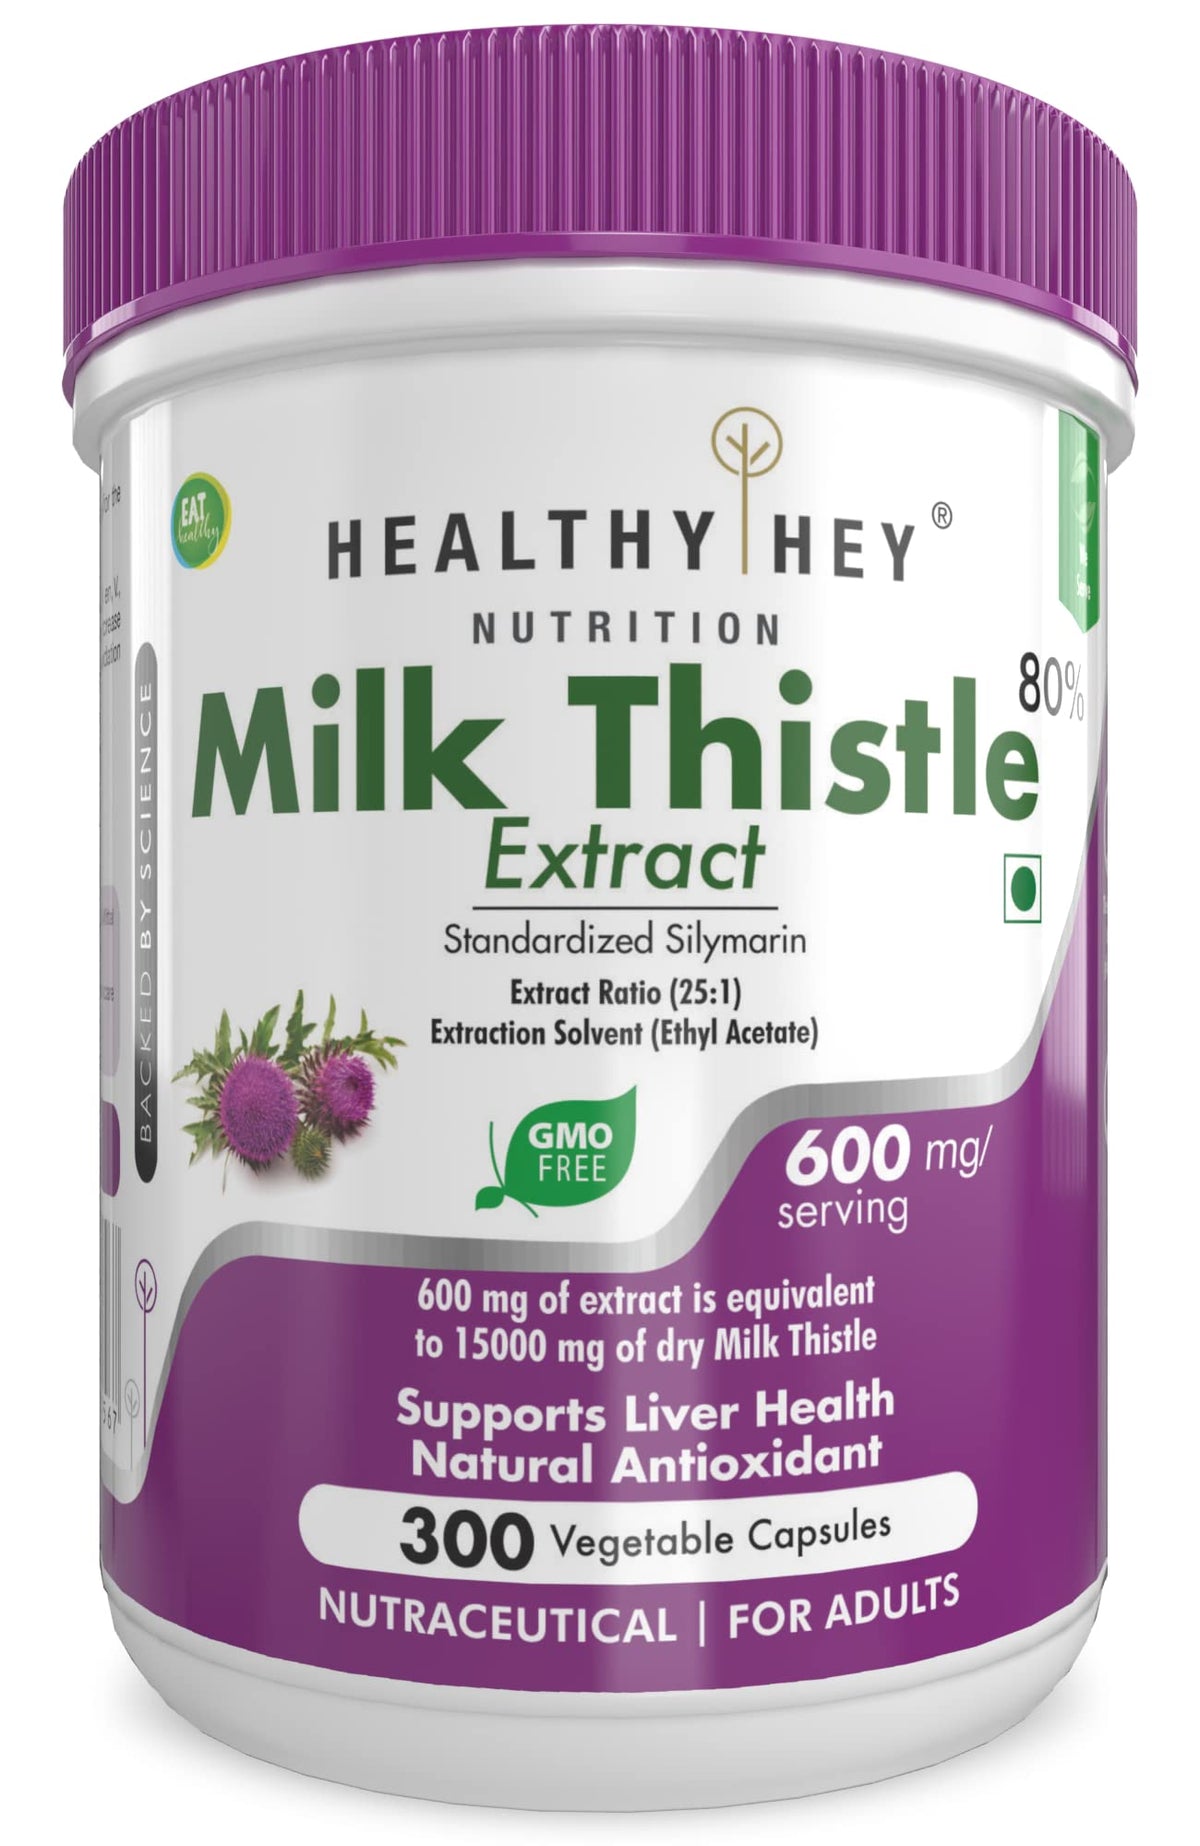 HealthyHey Nutrition Milk Thistle Capsules for Liver Health - High Strenght - 600mg Extract - 300 Veg. Capsules